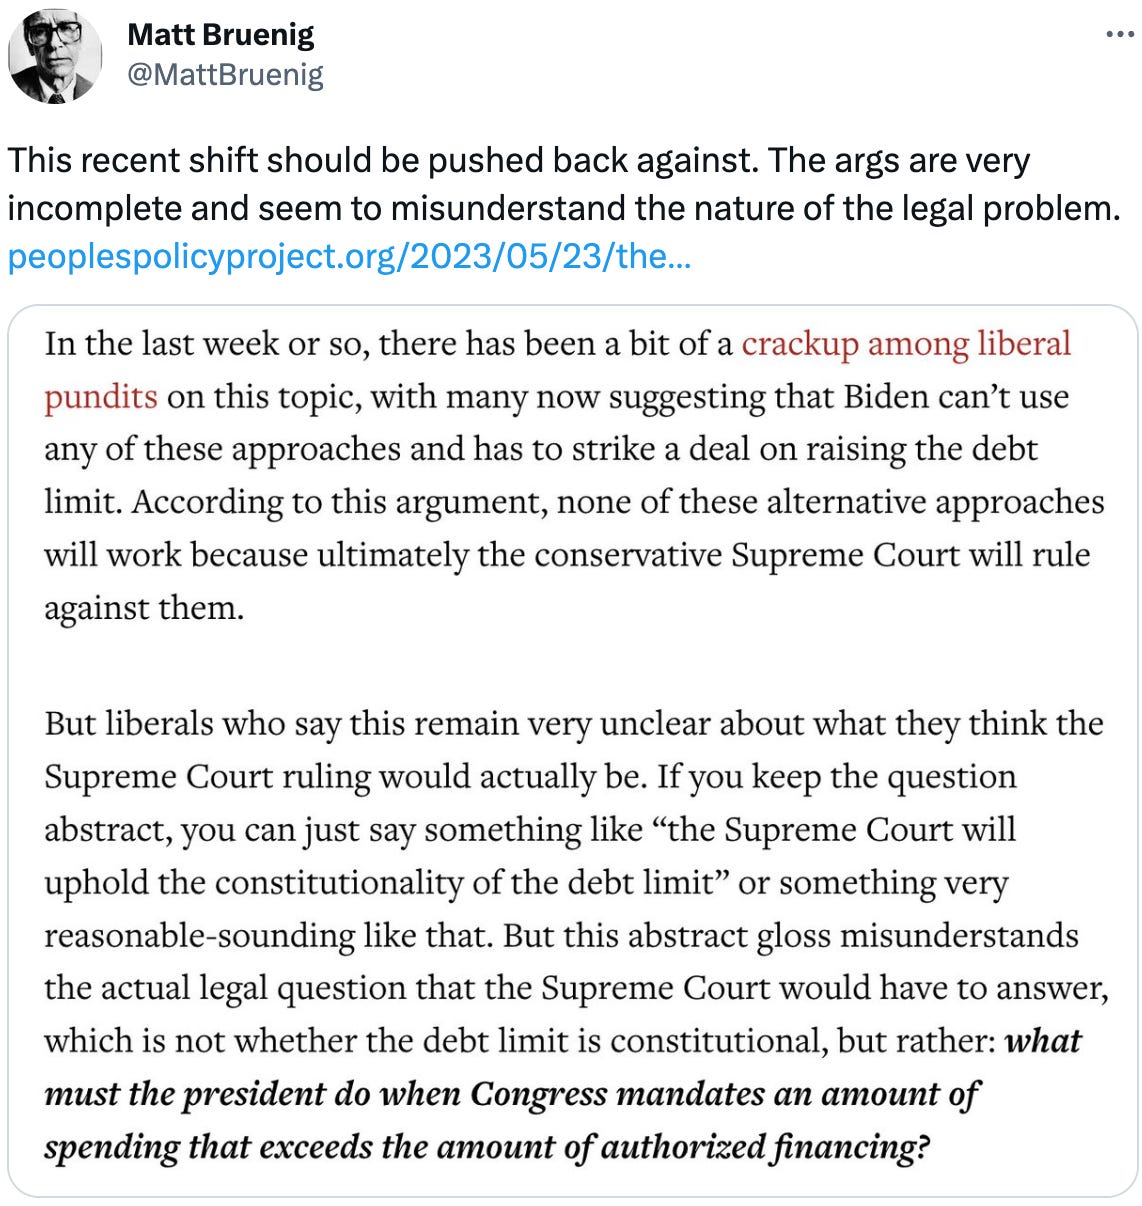 This recent shift should be pushed back against. The args are very incomplete and seem to misunderstand the nature of the legal problem. https://peoplespolicyproject.org/2023/05/23/the-debt-limit-situation/